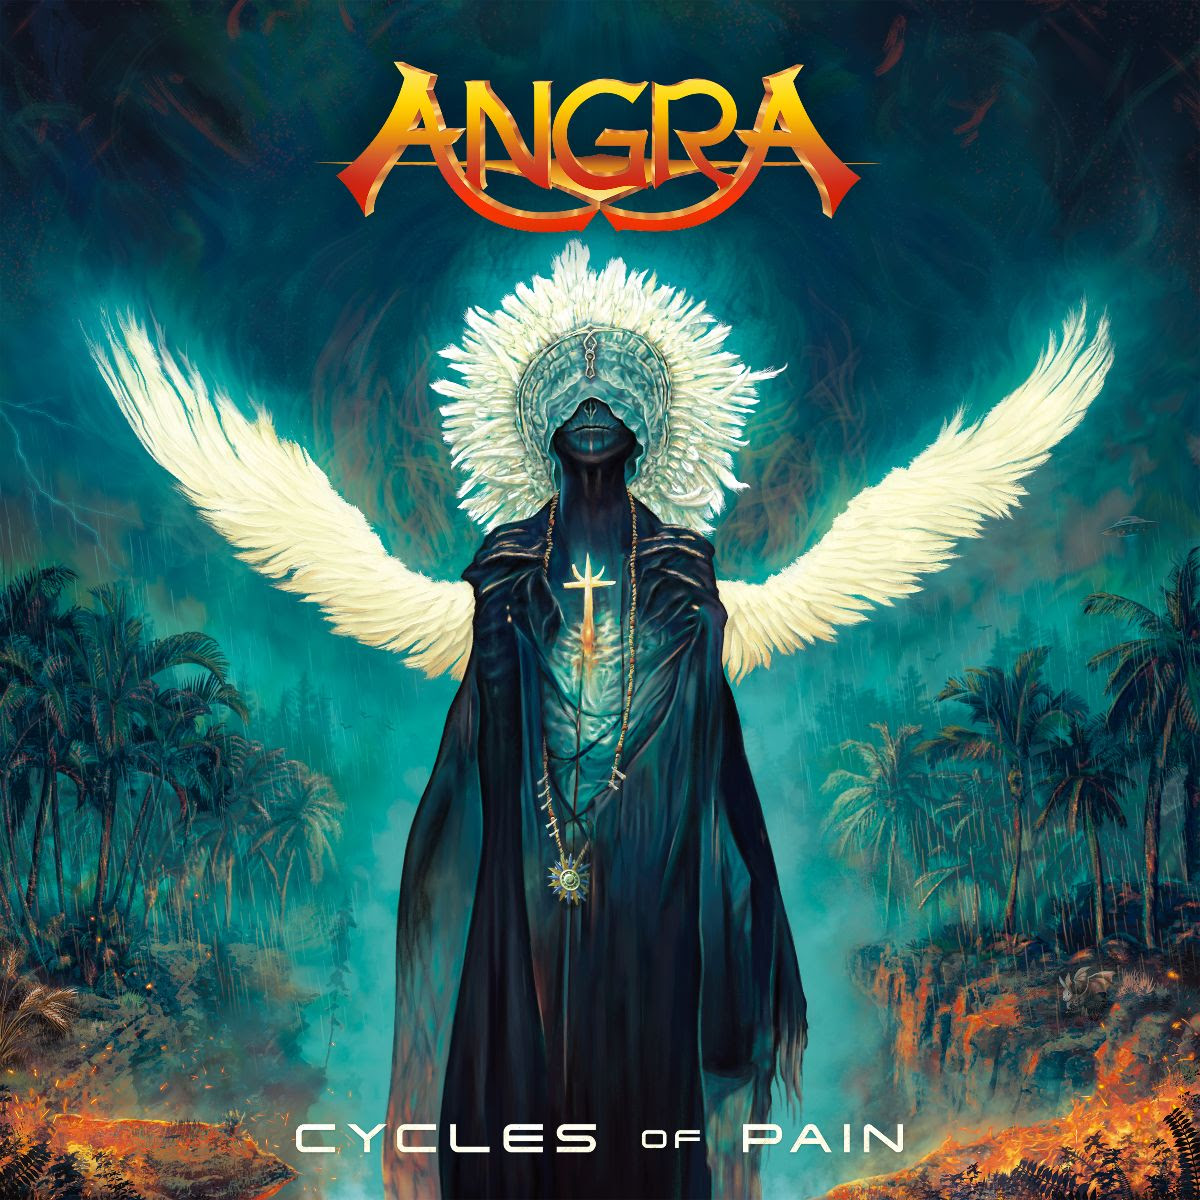 Cycles of Pain, new album from Angra Fe209f10-4b9f-39d3-1484-98a4aaf698e1